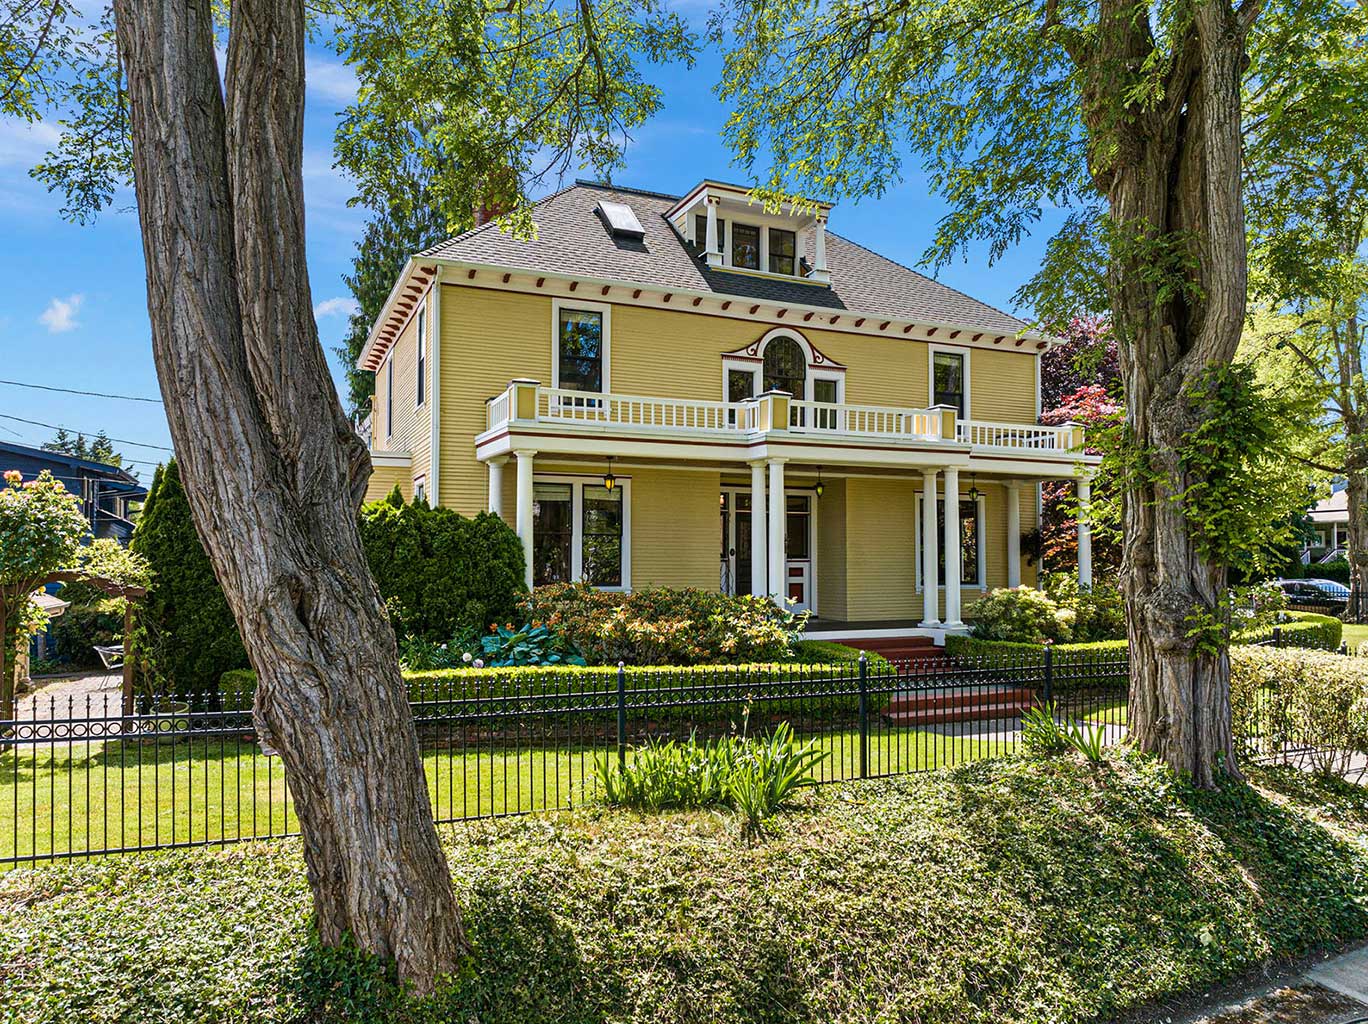 The Wells-Richter house was built circa 1892 in the Colonial Revival style with an American Foursquare form